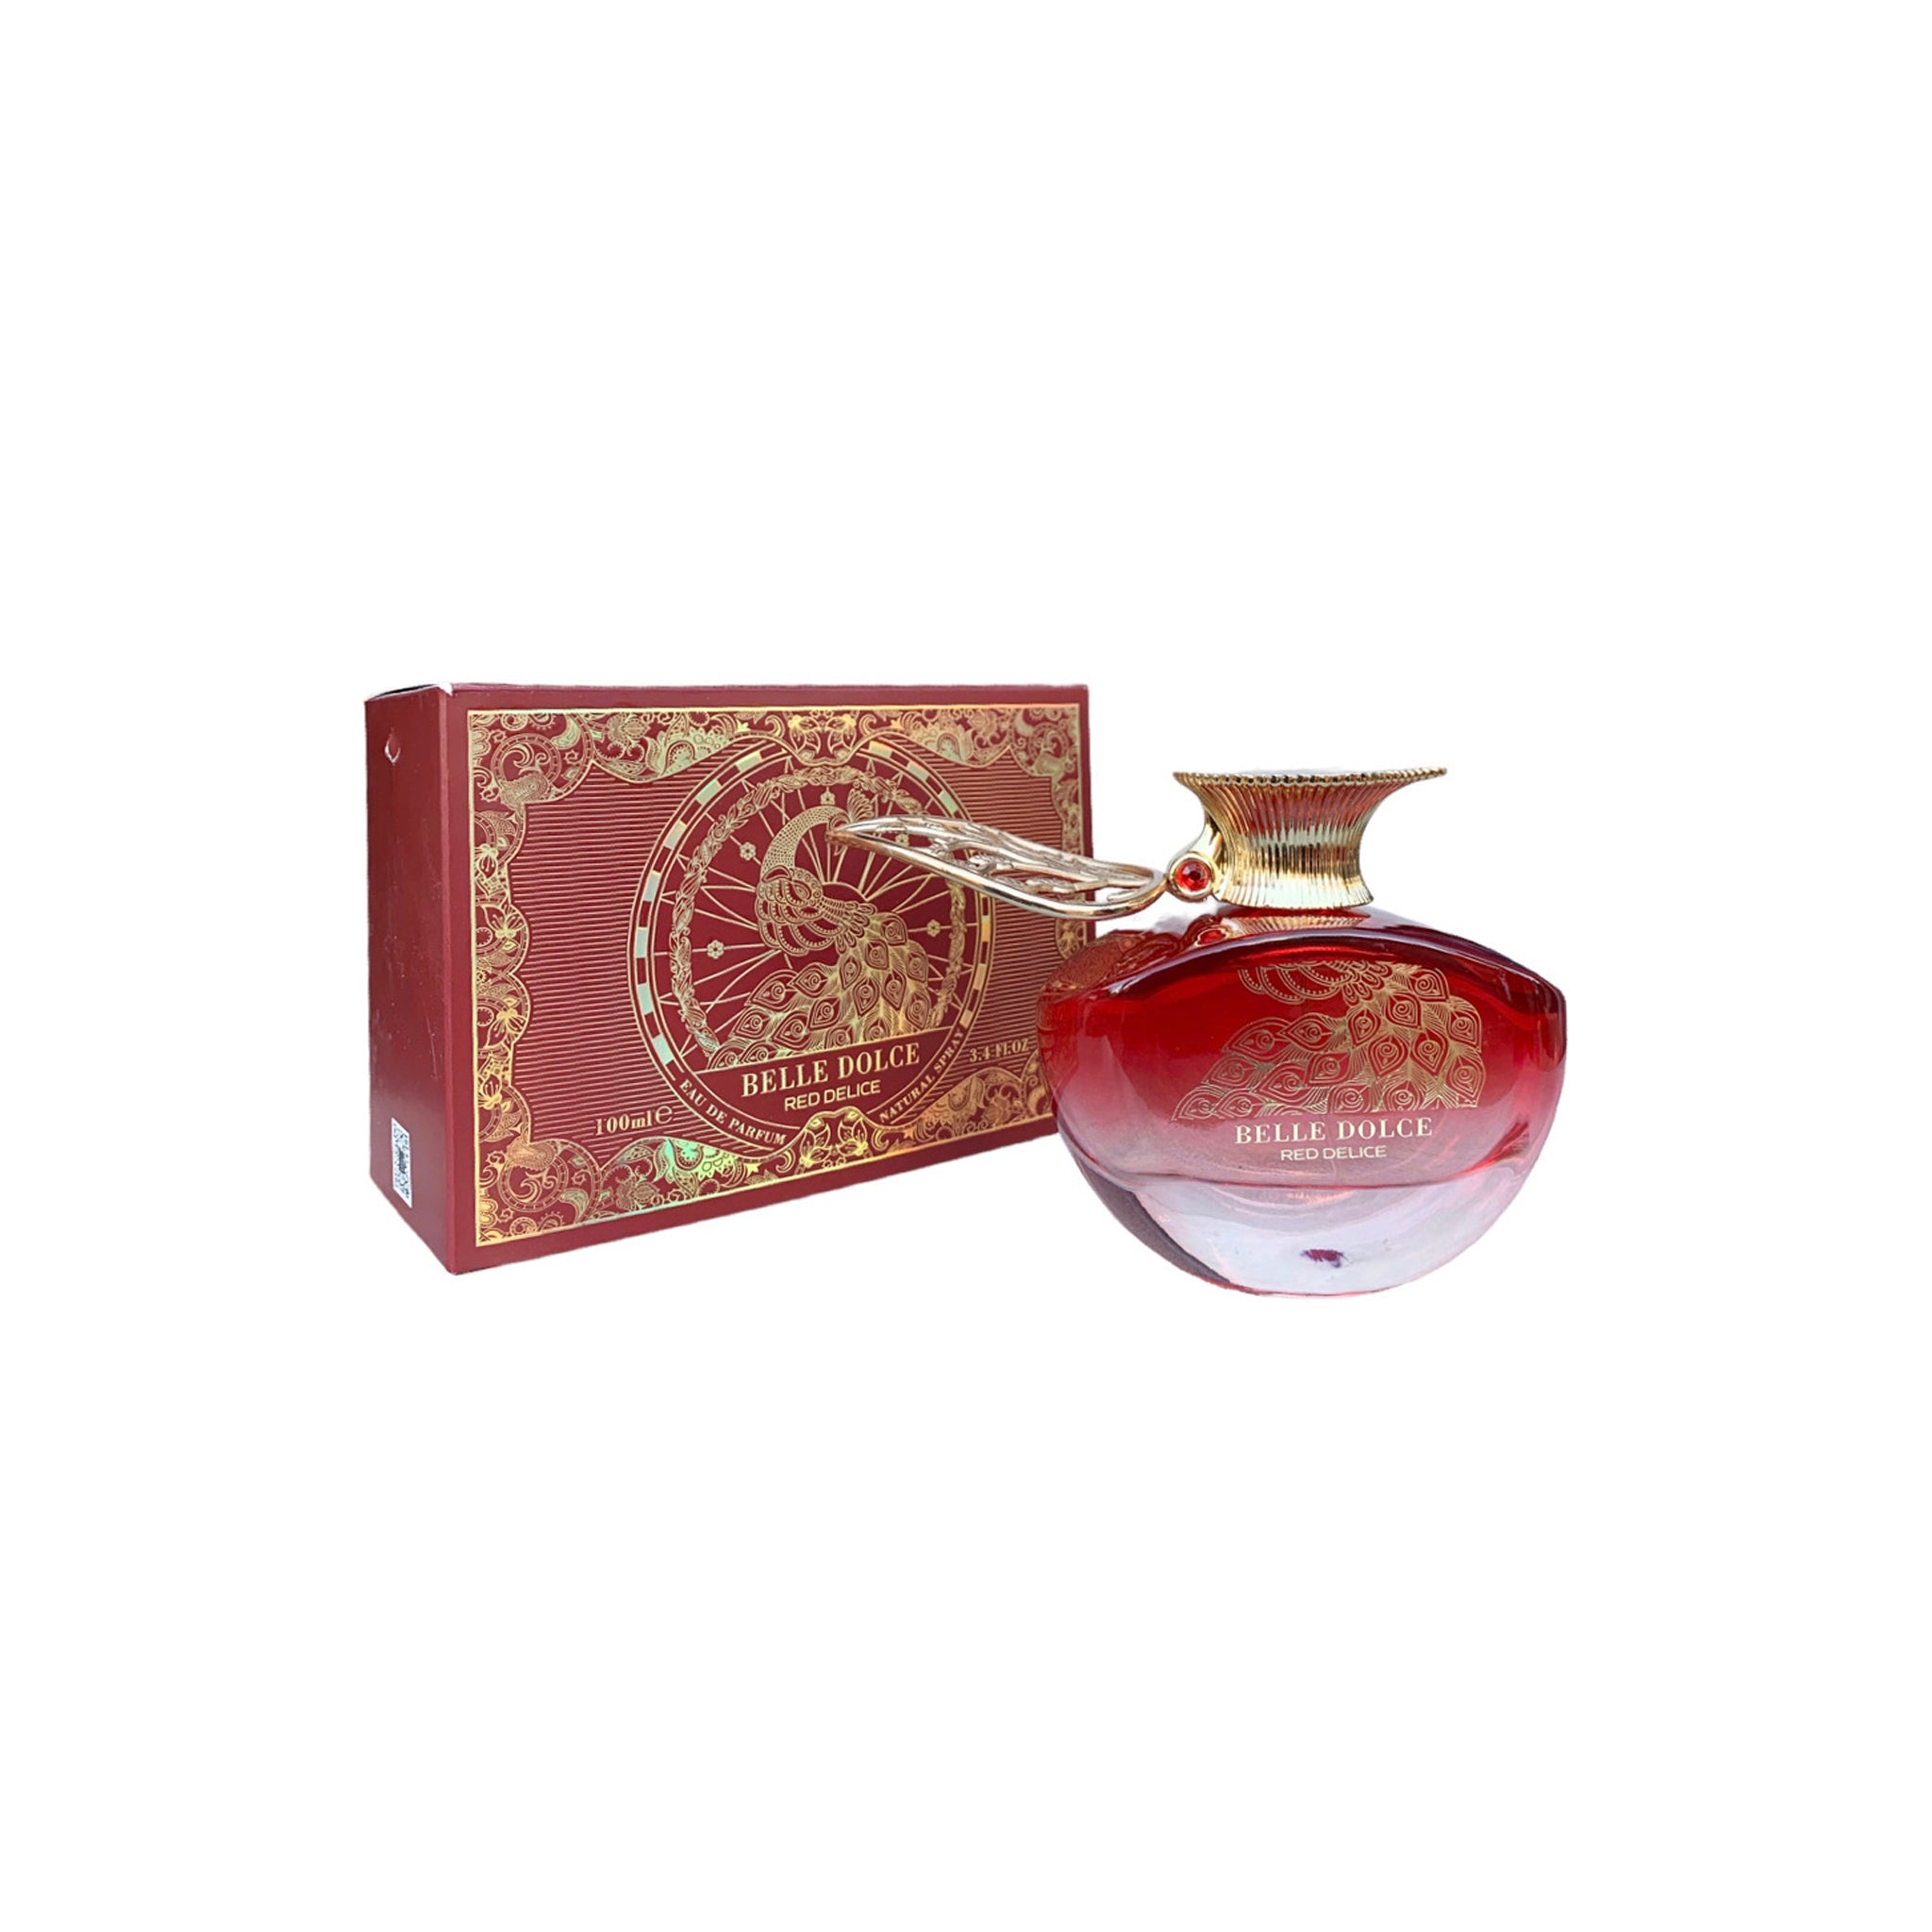 Belle Dolce Red Delice 100ml EDP by Fragrance World